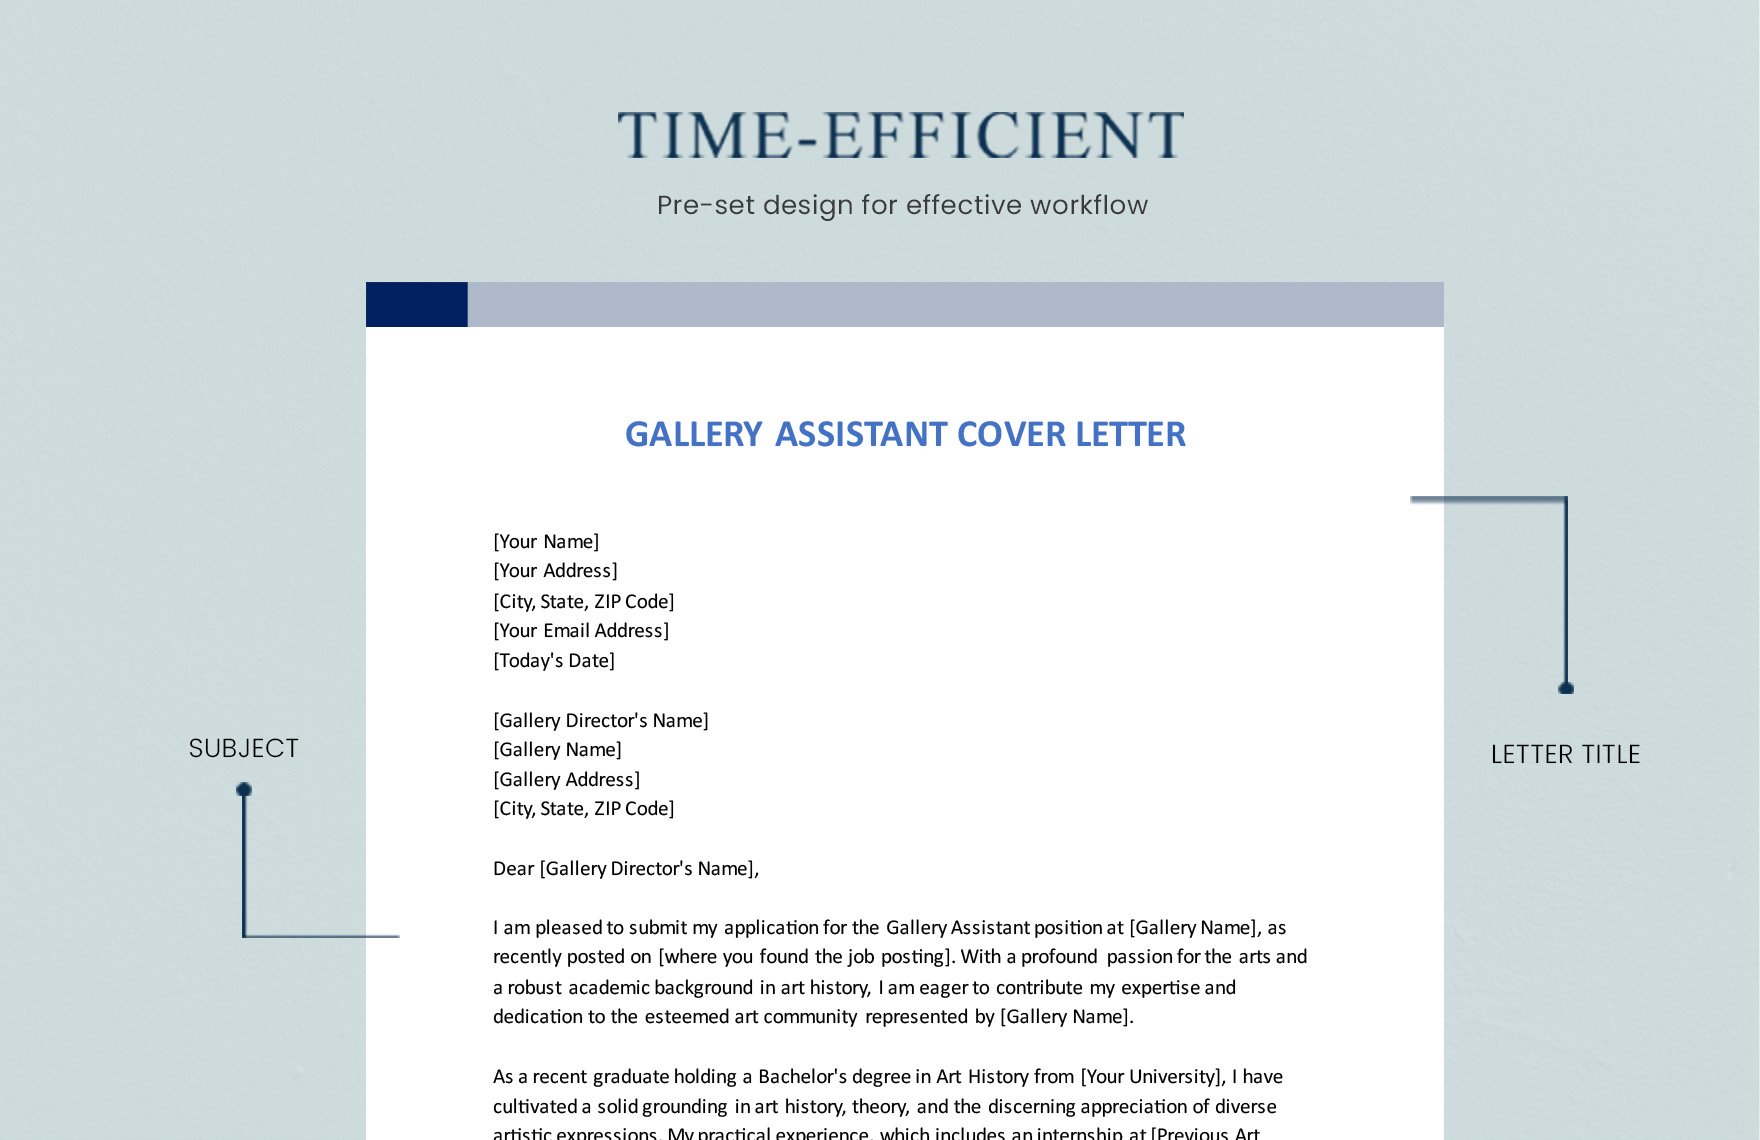 Gallery Assistant Cover Letter